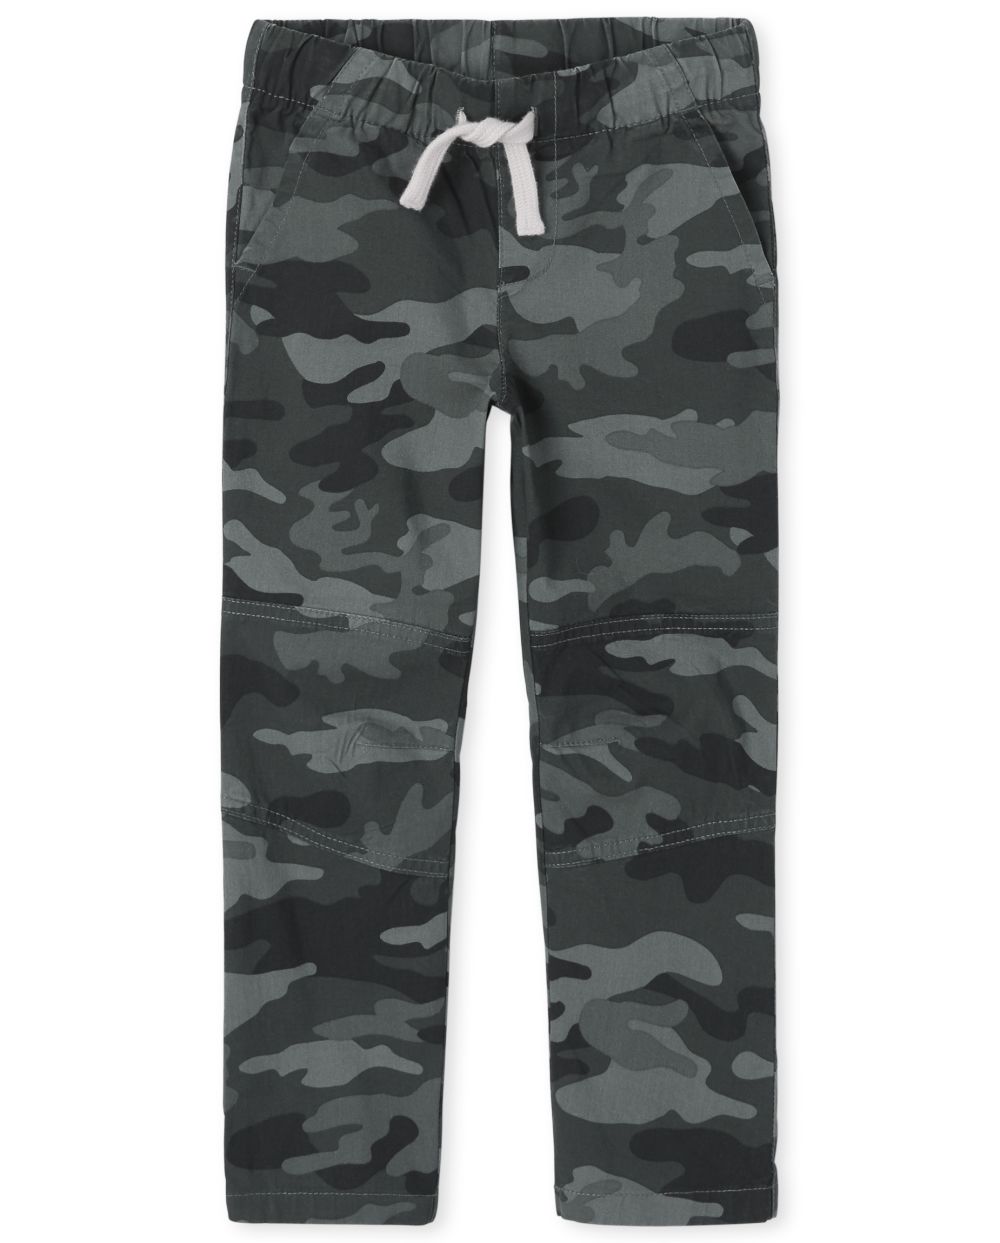 Boys Camo Stretch Woven Pull On Slim Jogger Pants